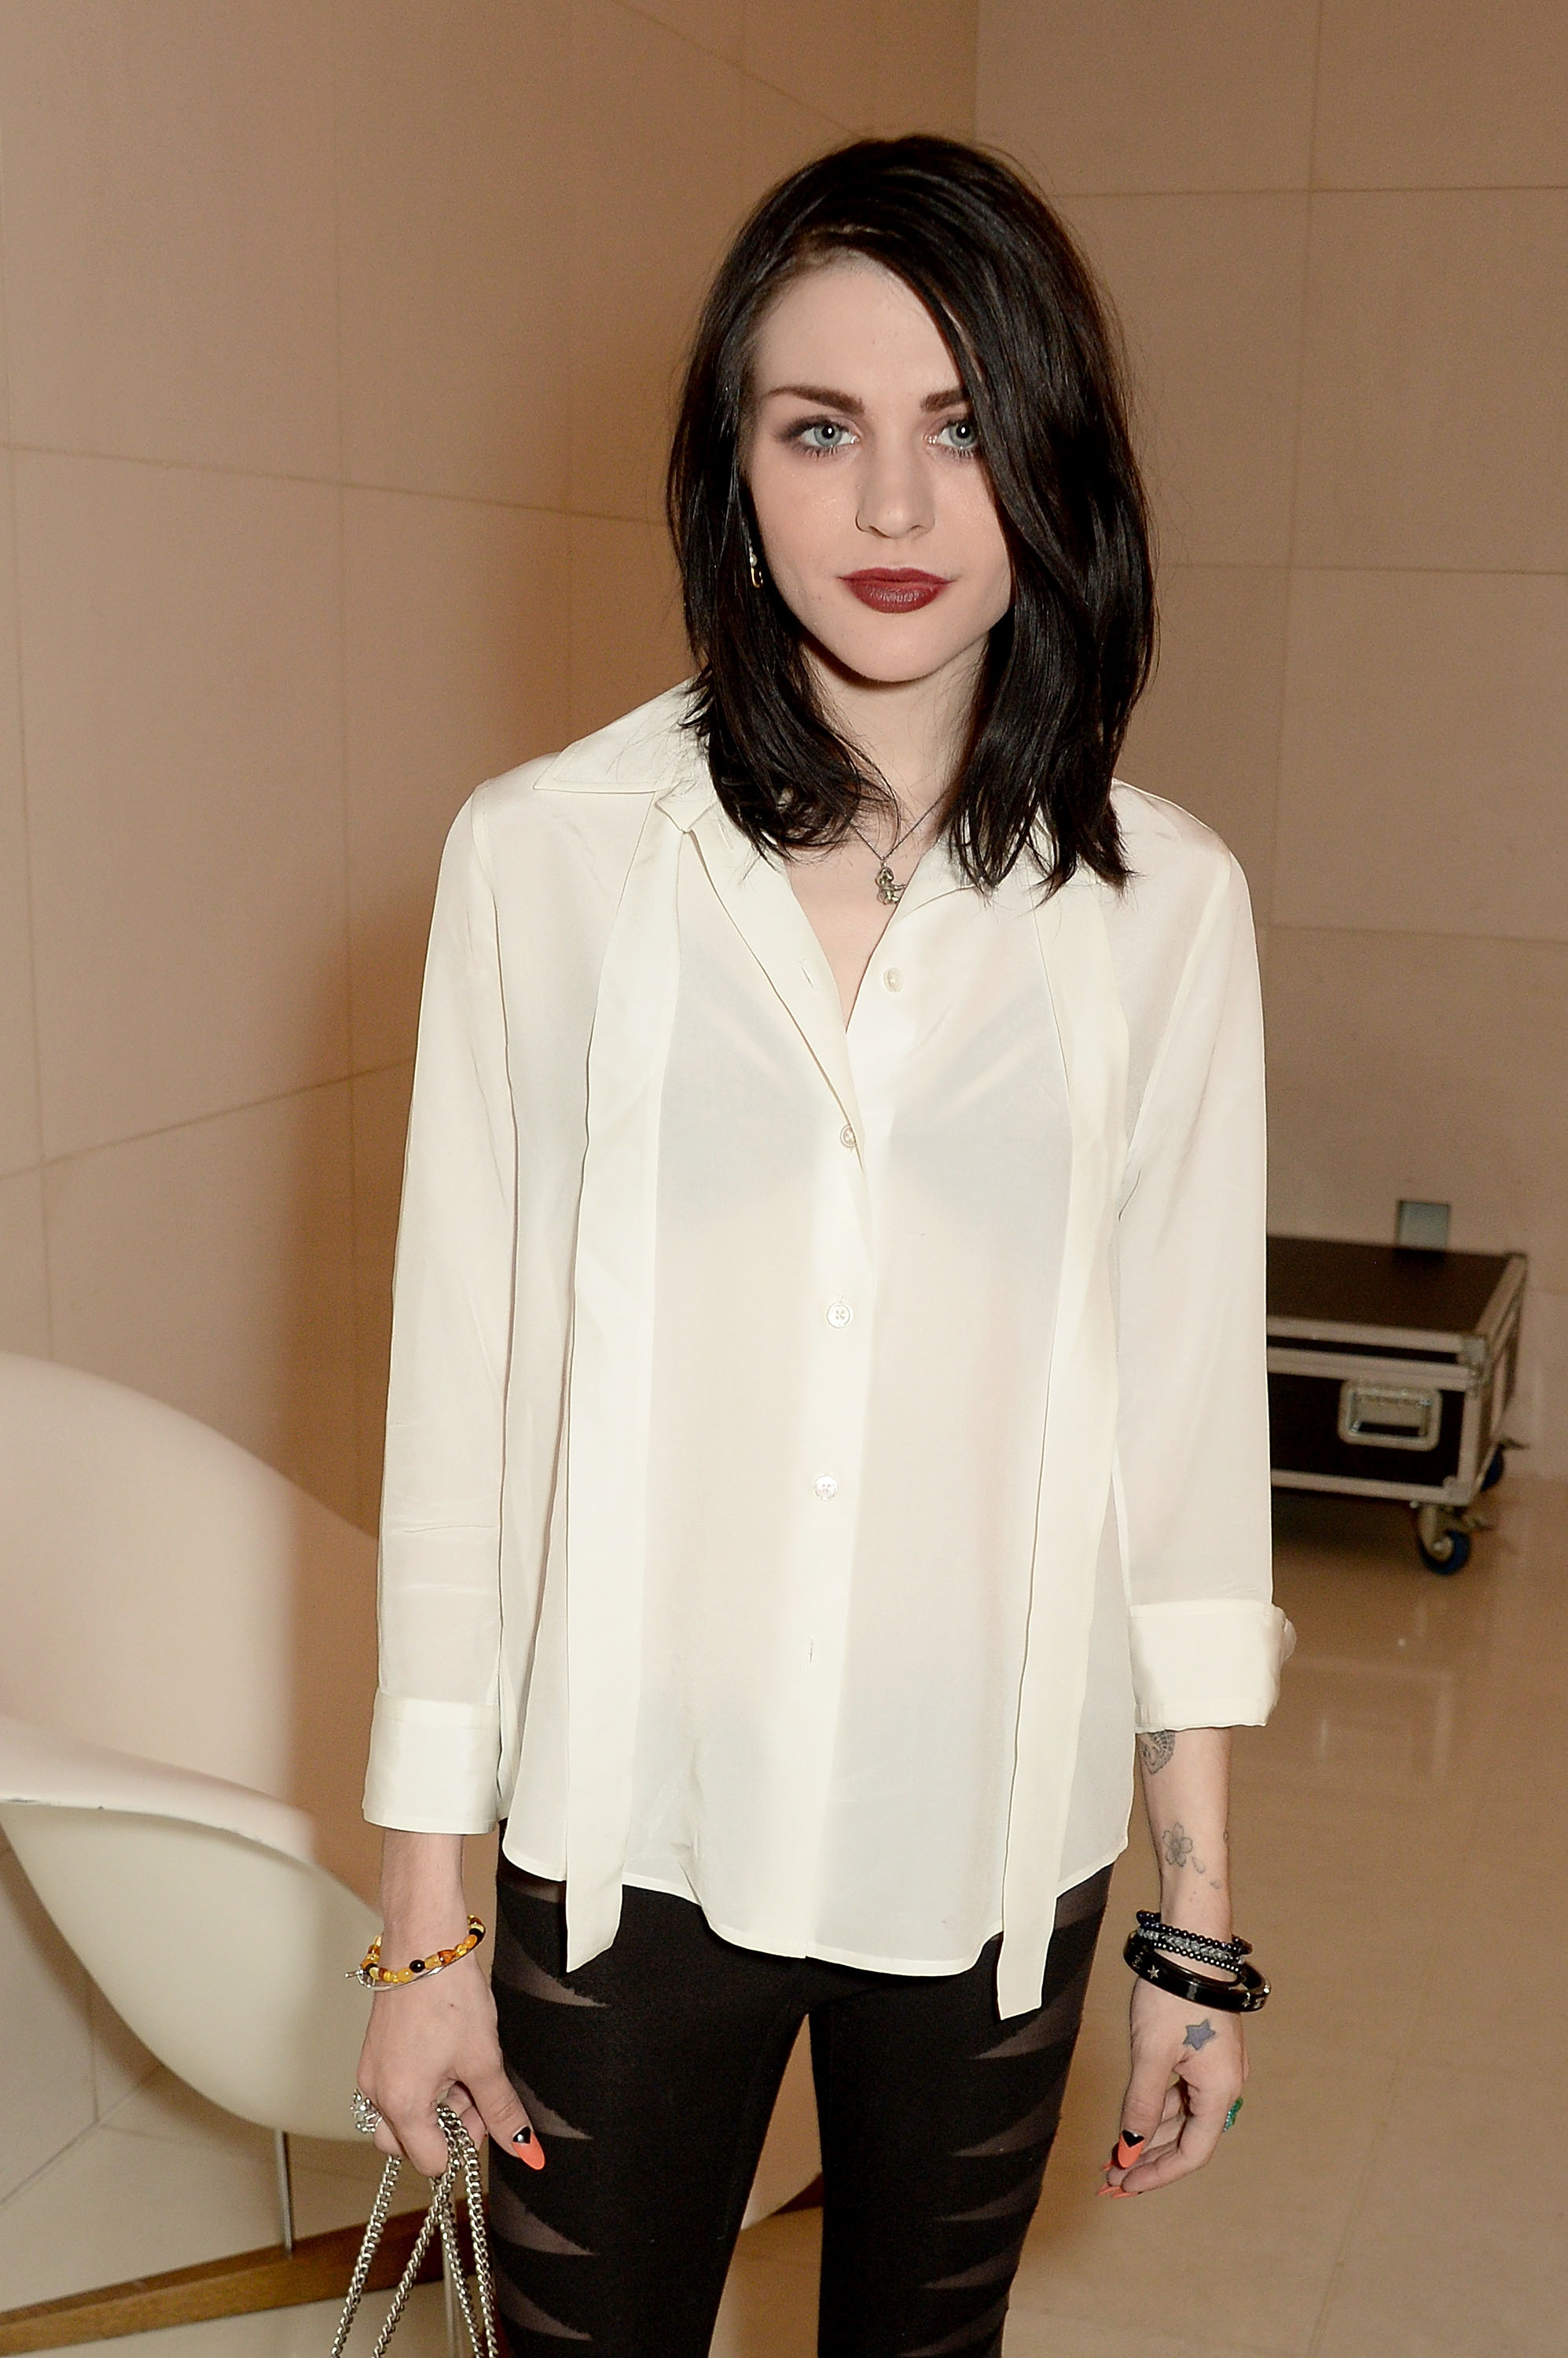 Frances Bean Cobain attends a special In Conversation event with Courtney Love as part of the Liberatum 'Women in Creativity' series, March 21, 2016 in London, England (David M. Benett—Getty Images)